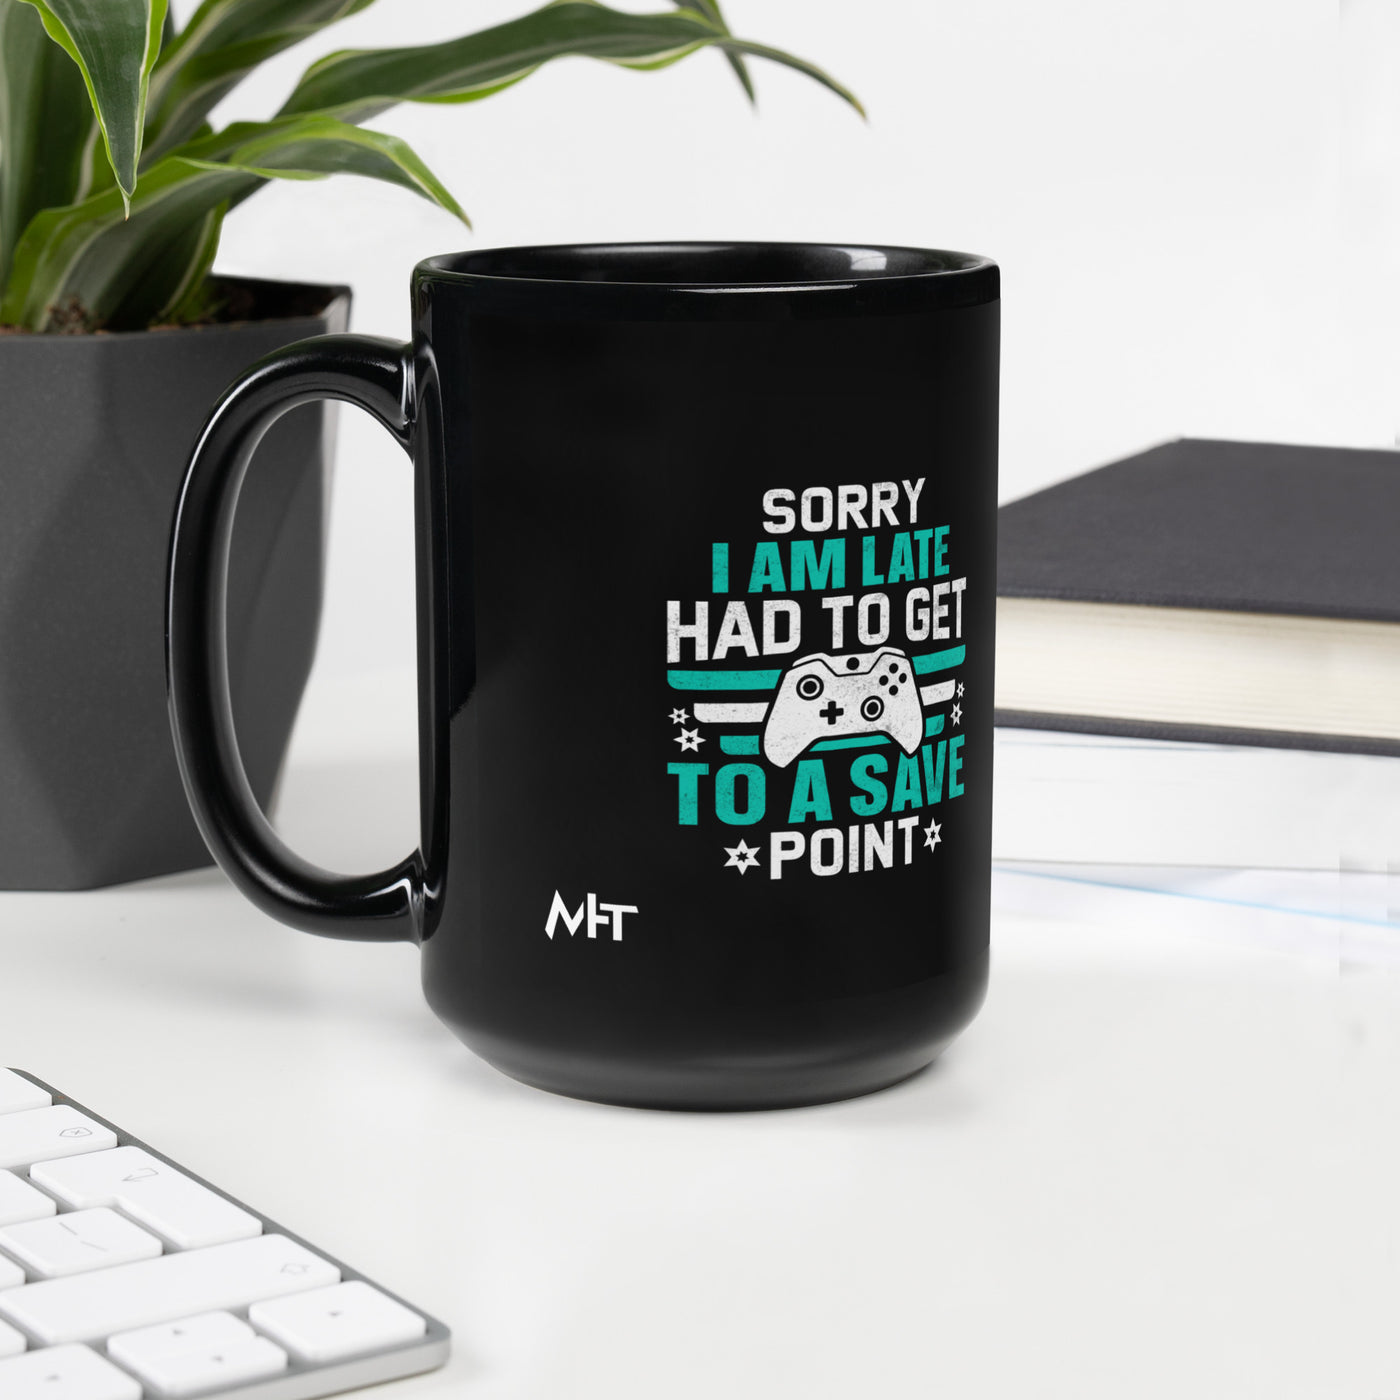 Sorry I am late, I Have to Get to a Save Point ( RK ) - Black Glossy Mug